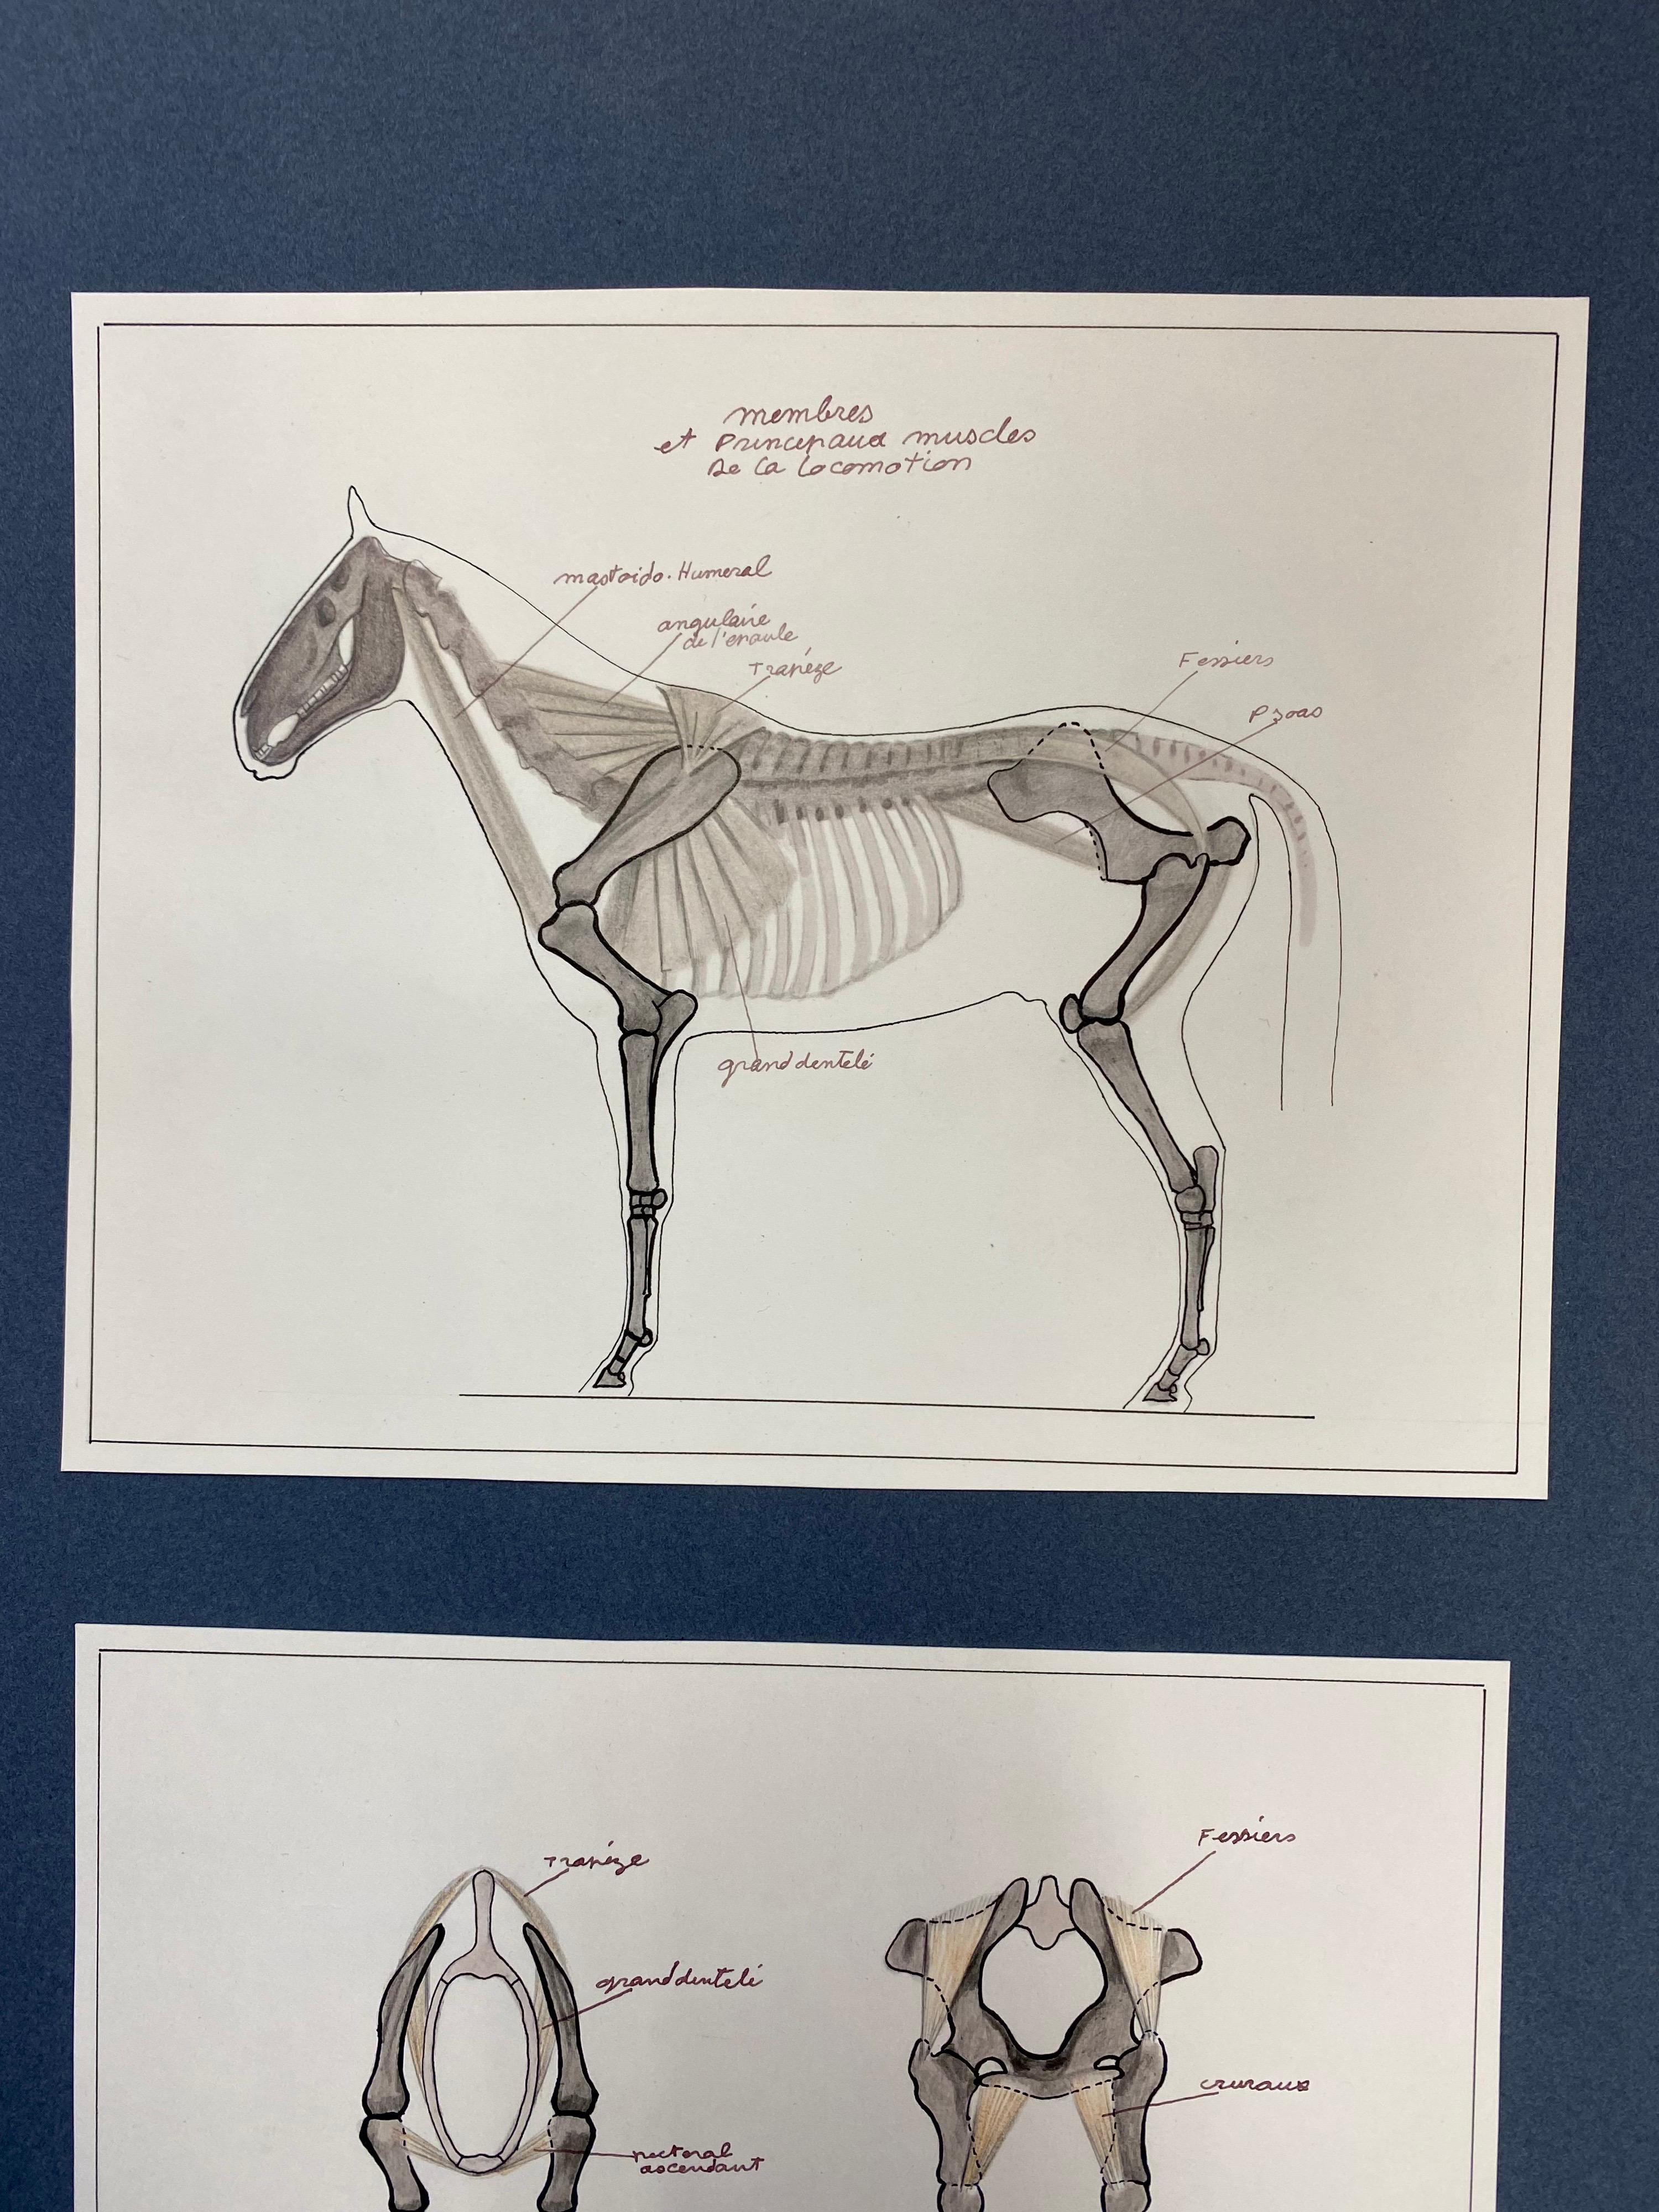 The Anatomy of a Horse
by Robert Ladou (French 1929-2014)
original drawing stuck on card in blue folder/ thick paper, unframed
top drawing: 7.25 x 9.25 inches
bottom drawing: 7 x 8.75 inches
overall size: 19.75 x 12.75
condition: very